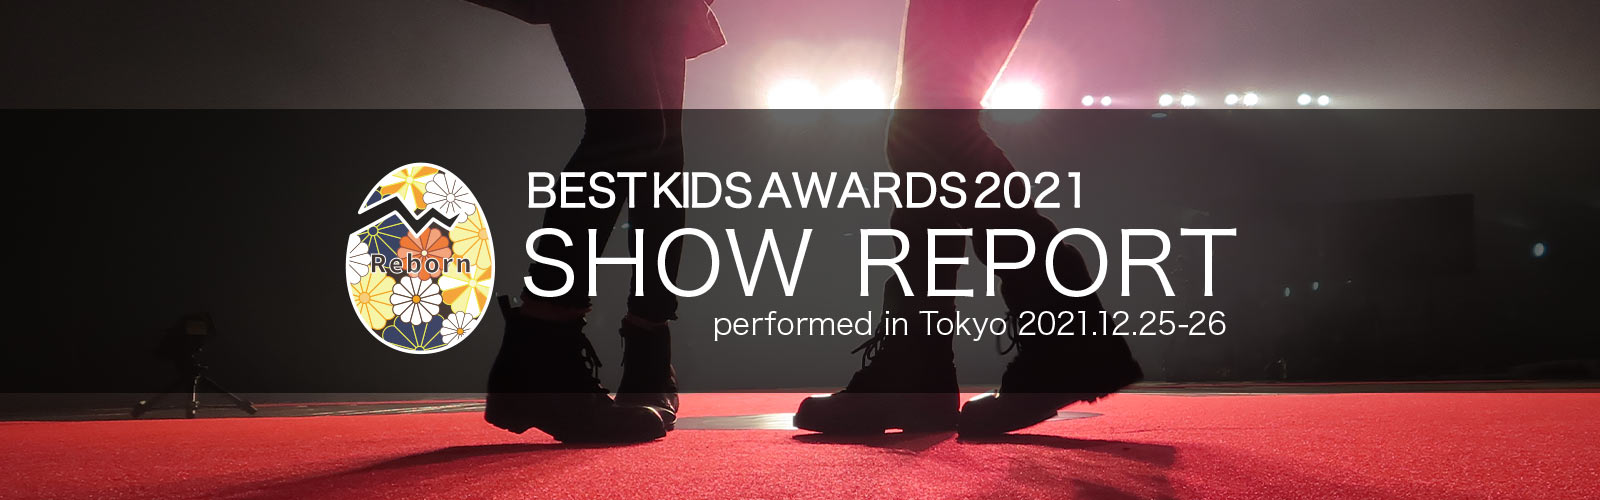 BEST KIDS AUDITION 2021 SHOW REPORT